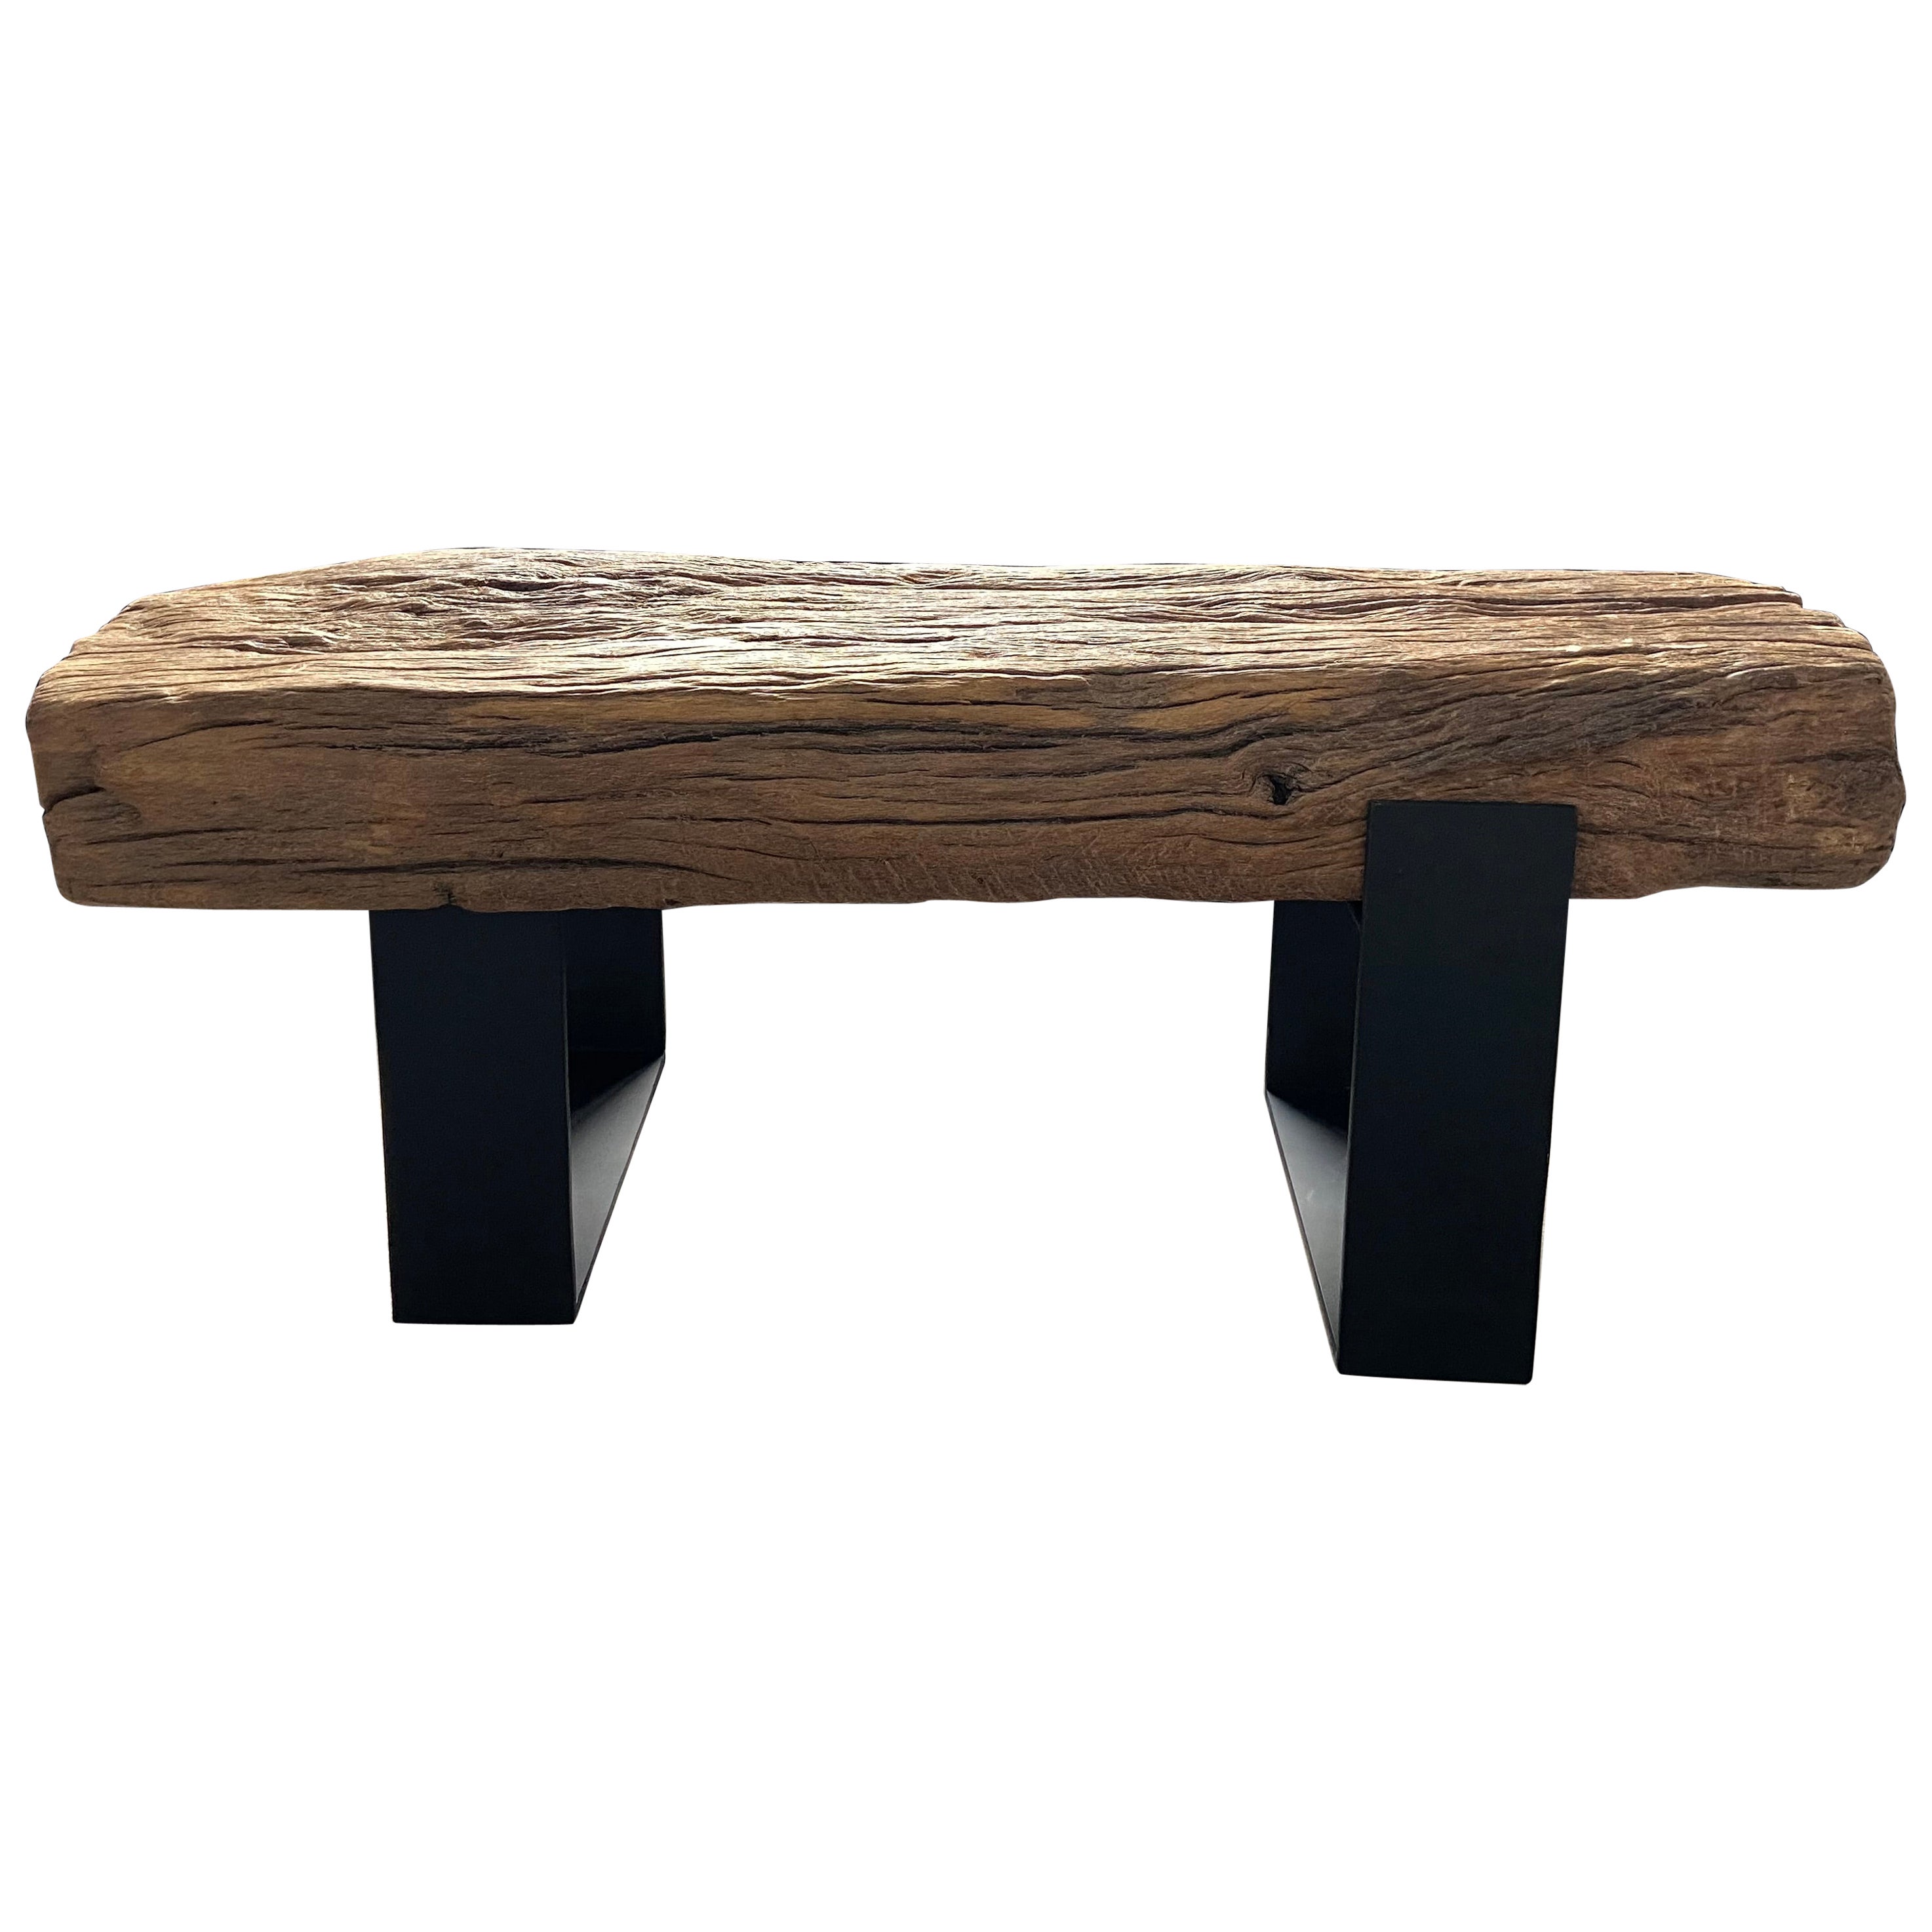 Mesquite Plank Table with Iron Bases by Artefakto For Sale